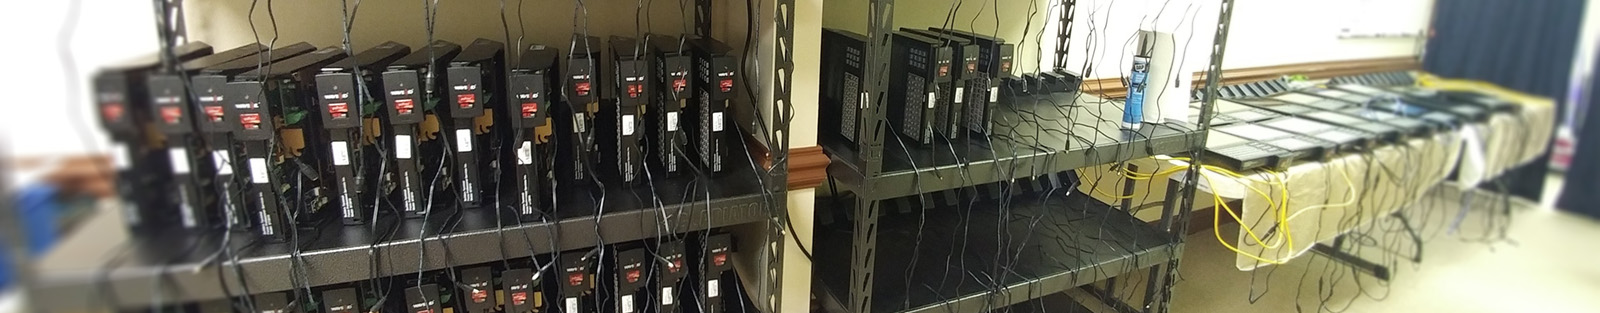 Large metal shelves holding many Tempus Pro Data Collection Terminals side-by-side